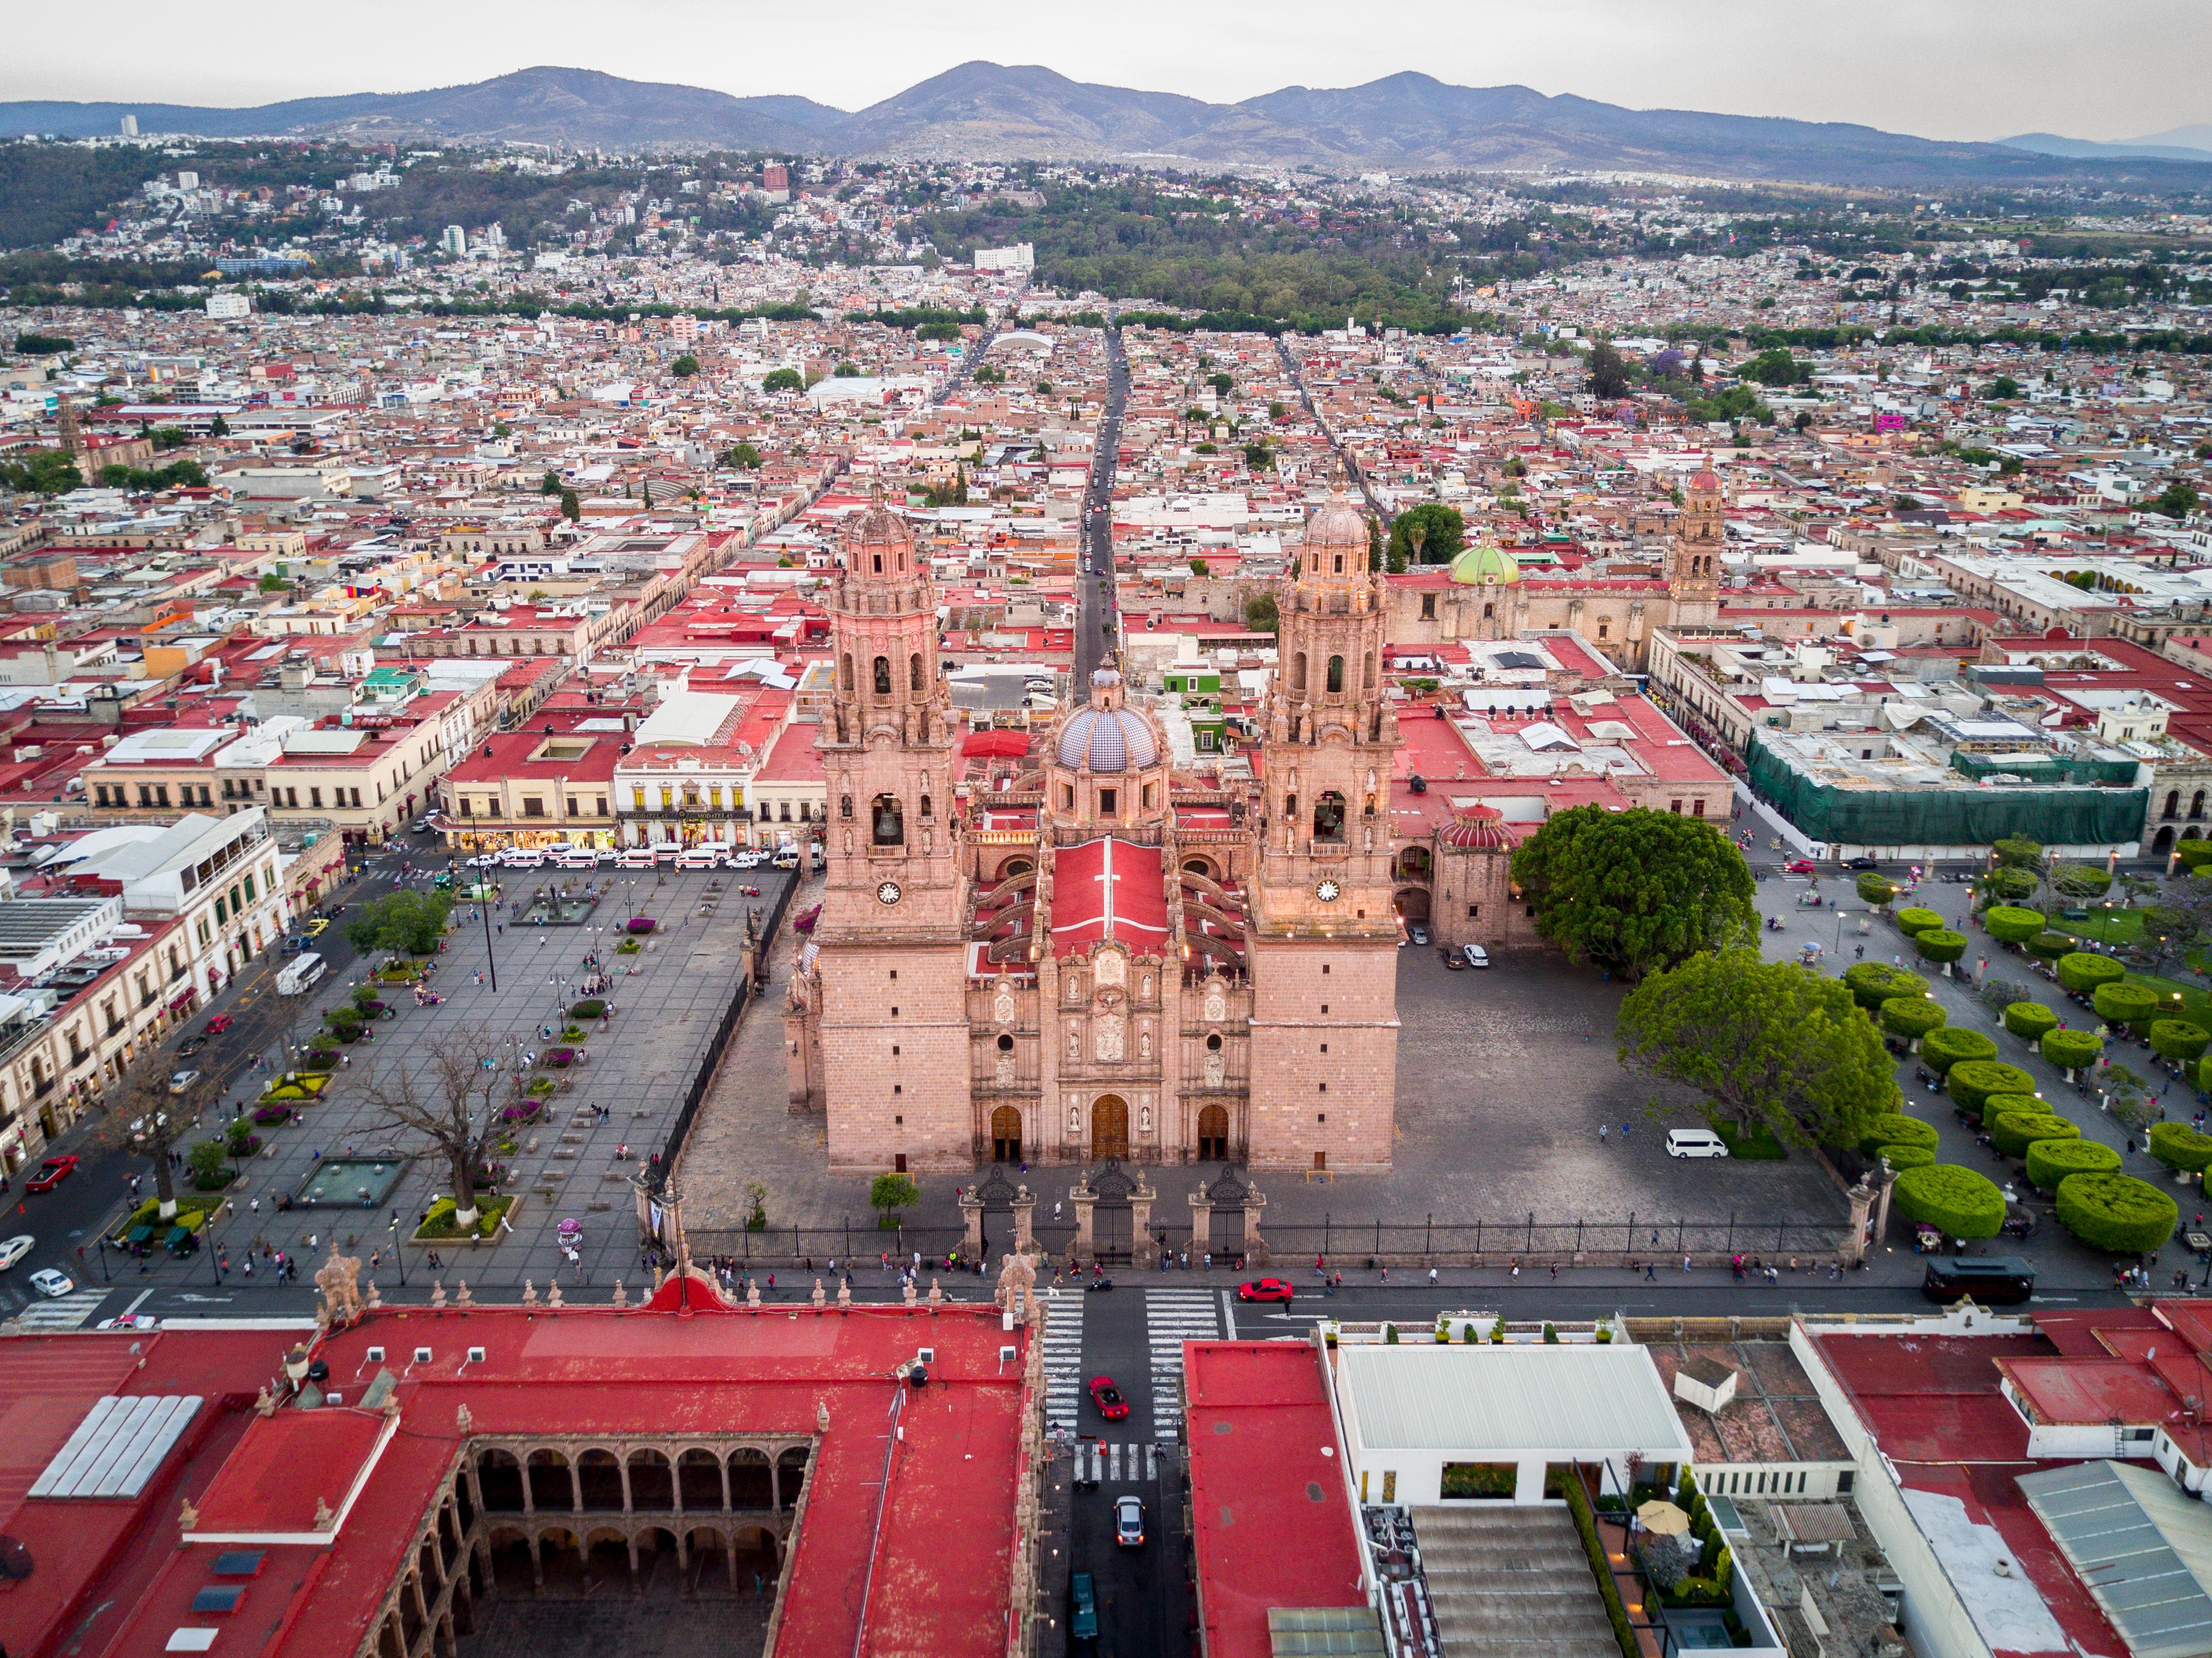 Car Rentals in Morelia from $9/day - Search for Rental Cars on KAYAK